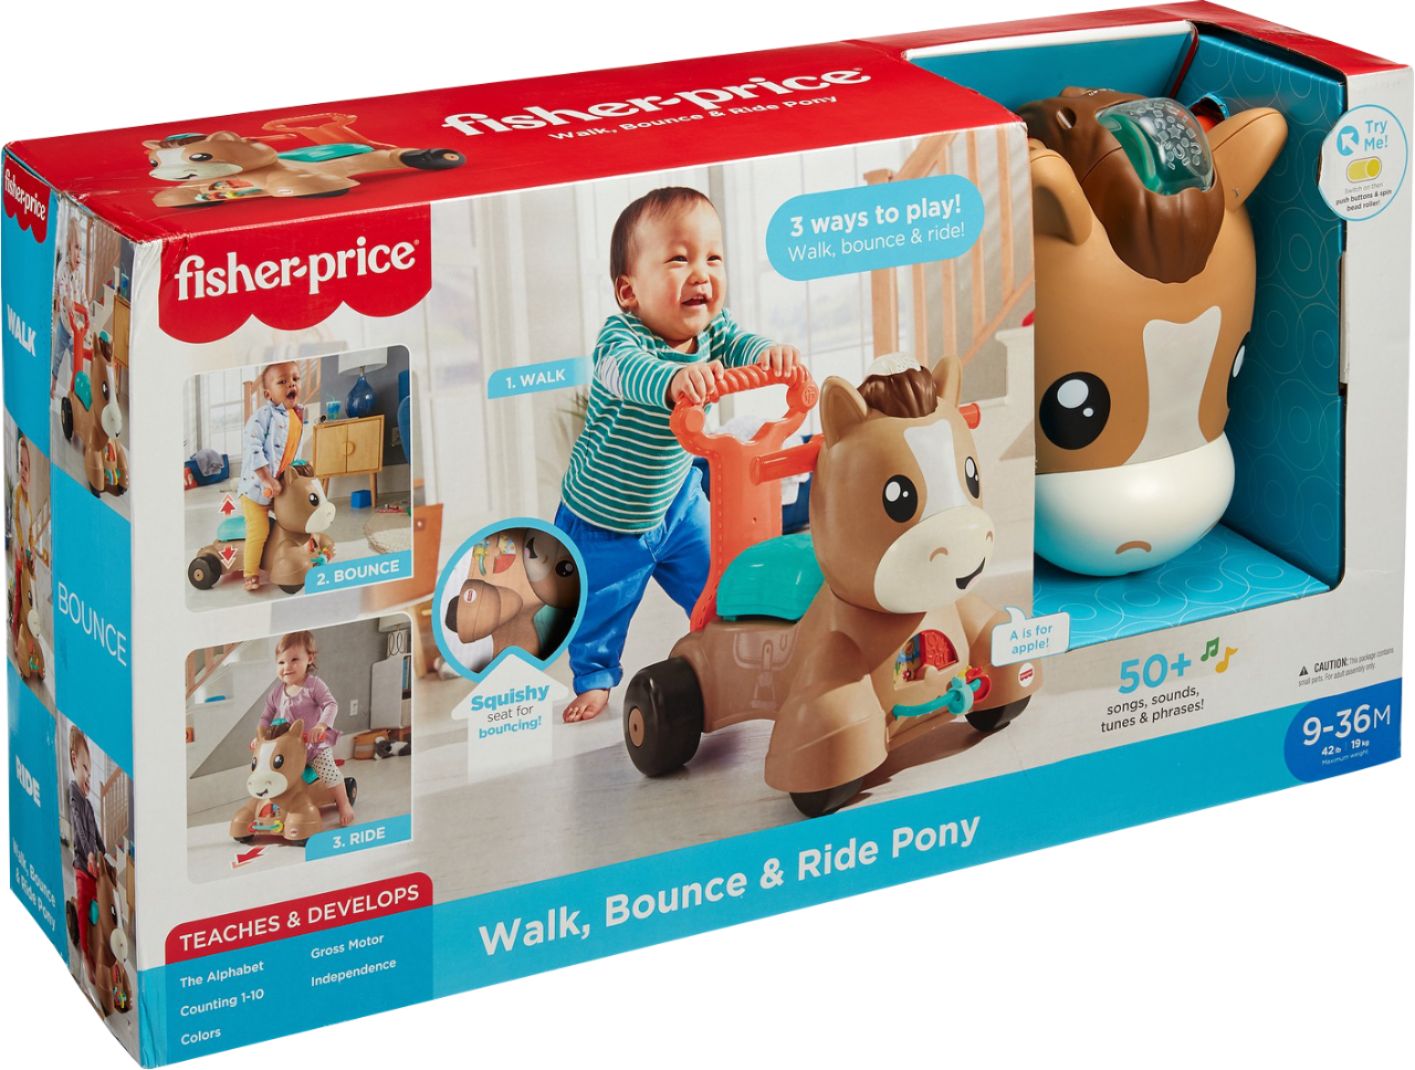 Left View: Fisher-Price Walk, Bounce and Ride Pony - Brown